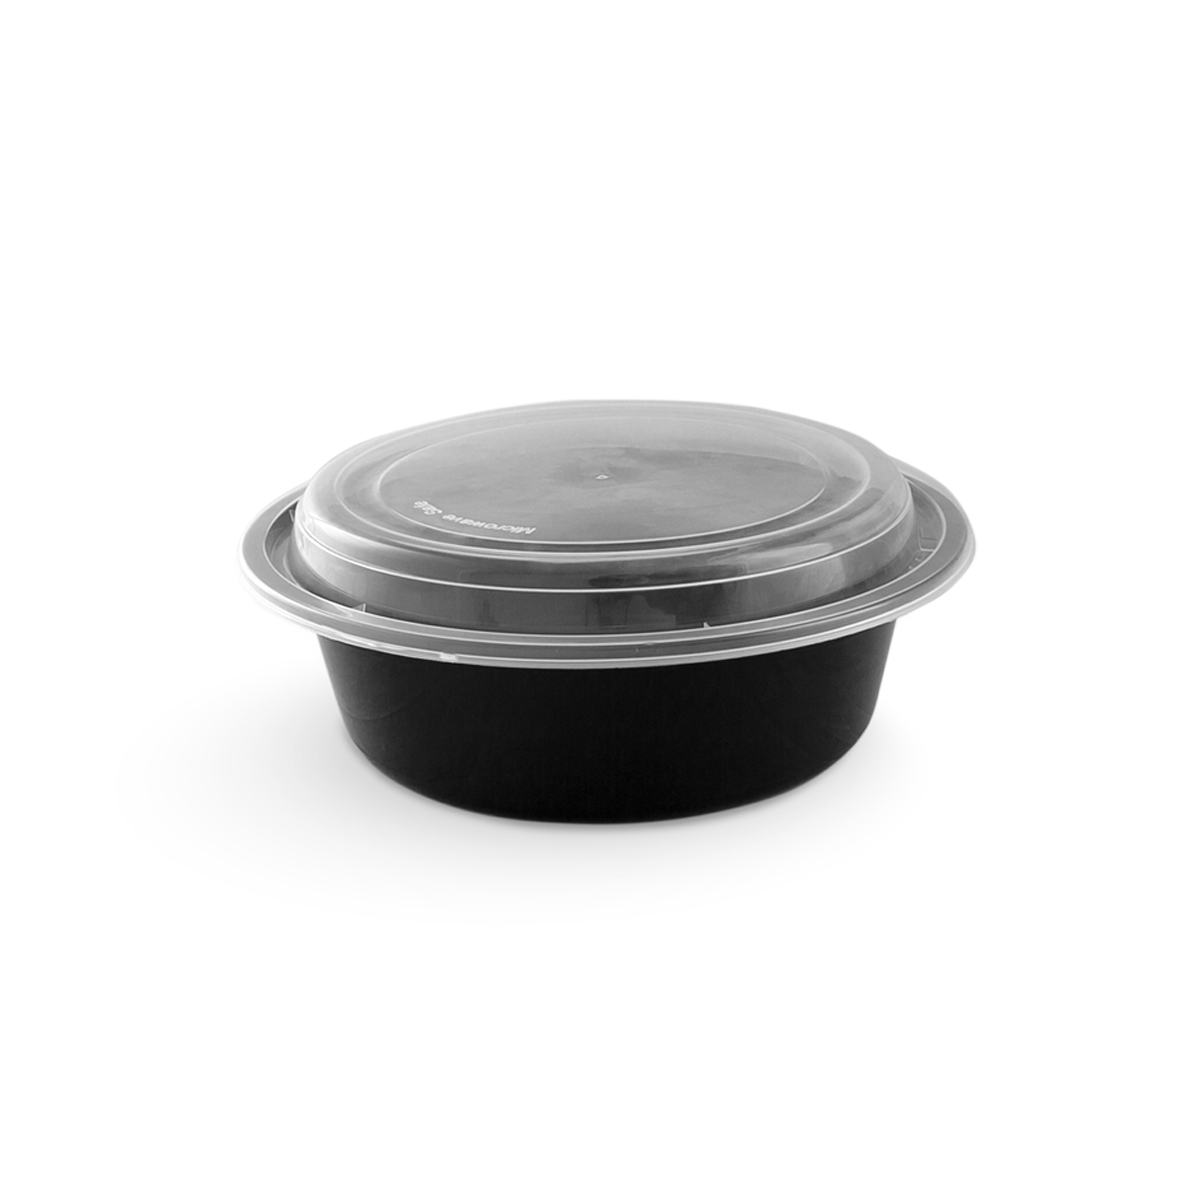 Microwave Container with Lid,16 Oz (Round Shape, Black Colour)